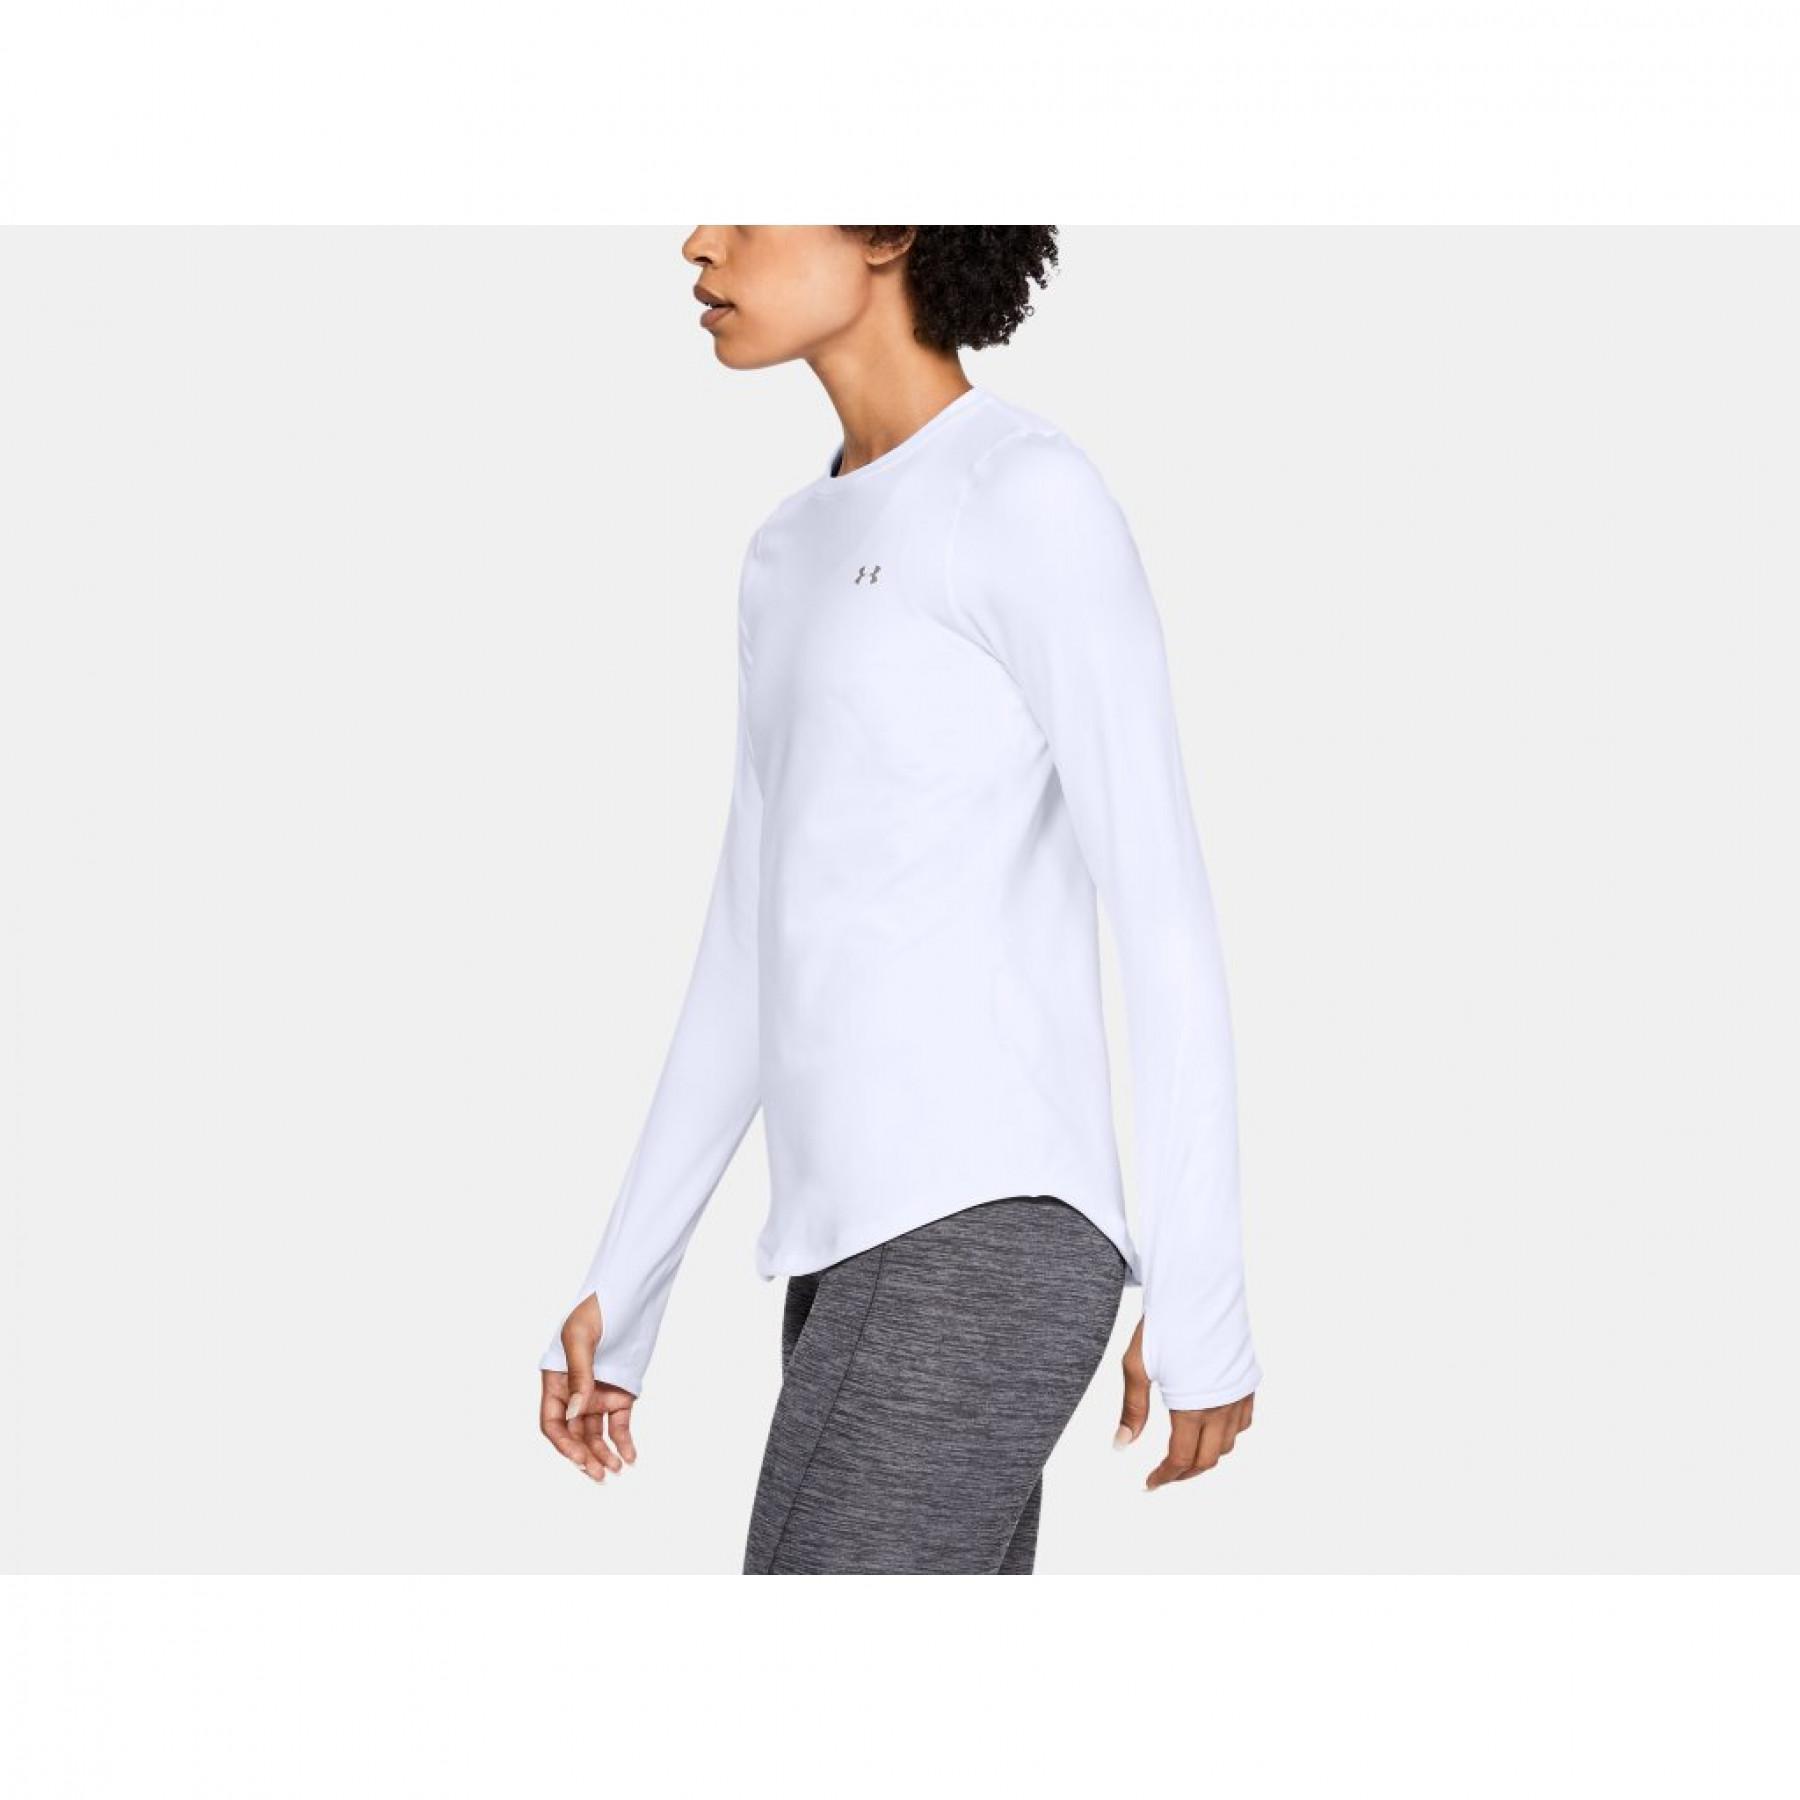 Women's crew neck top Under Armour ColdGear® Fitted